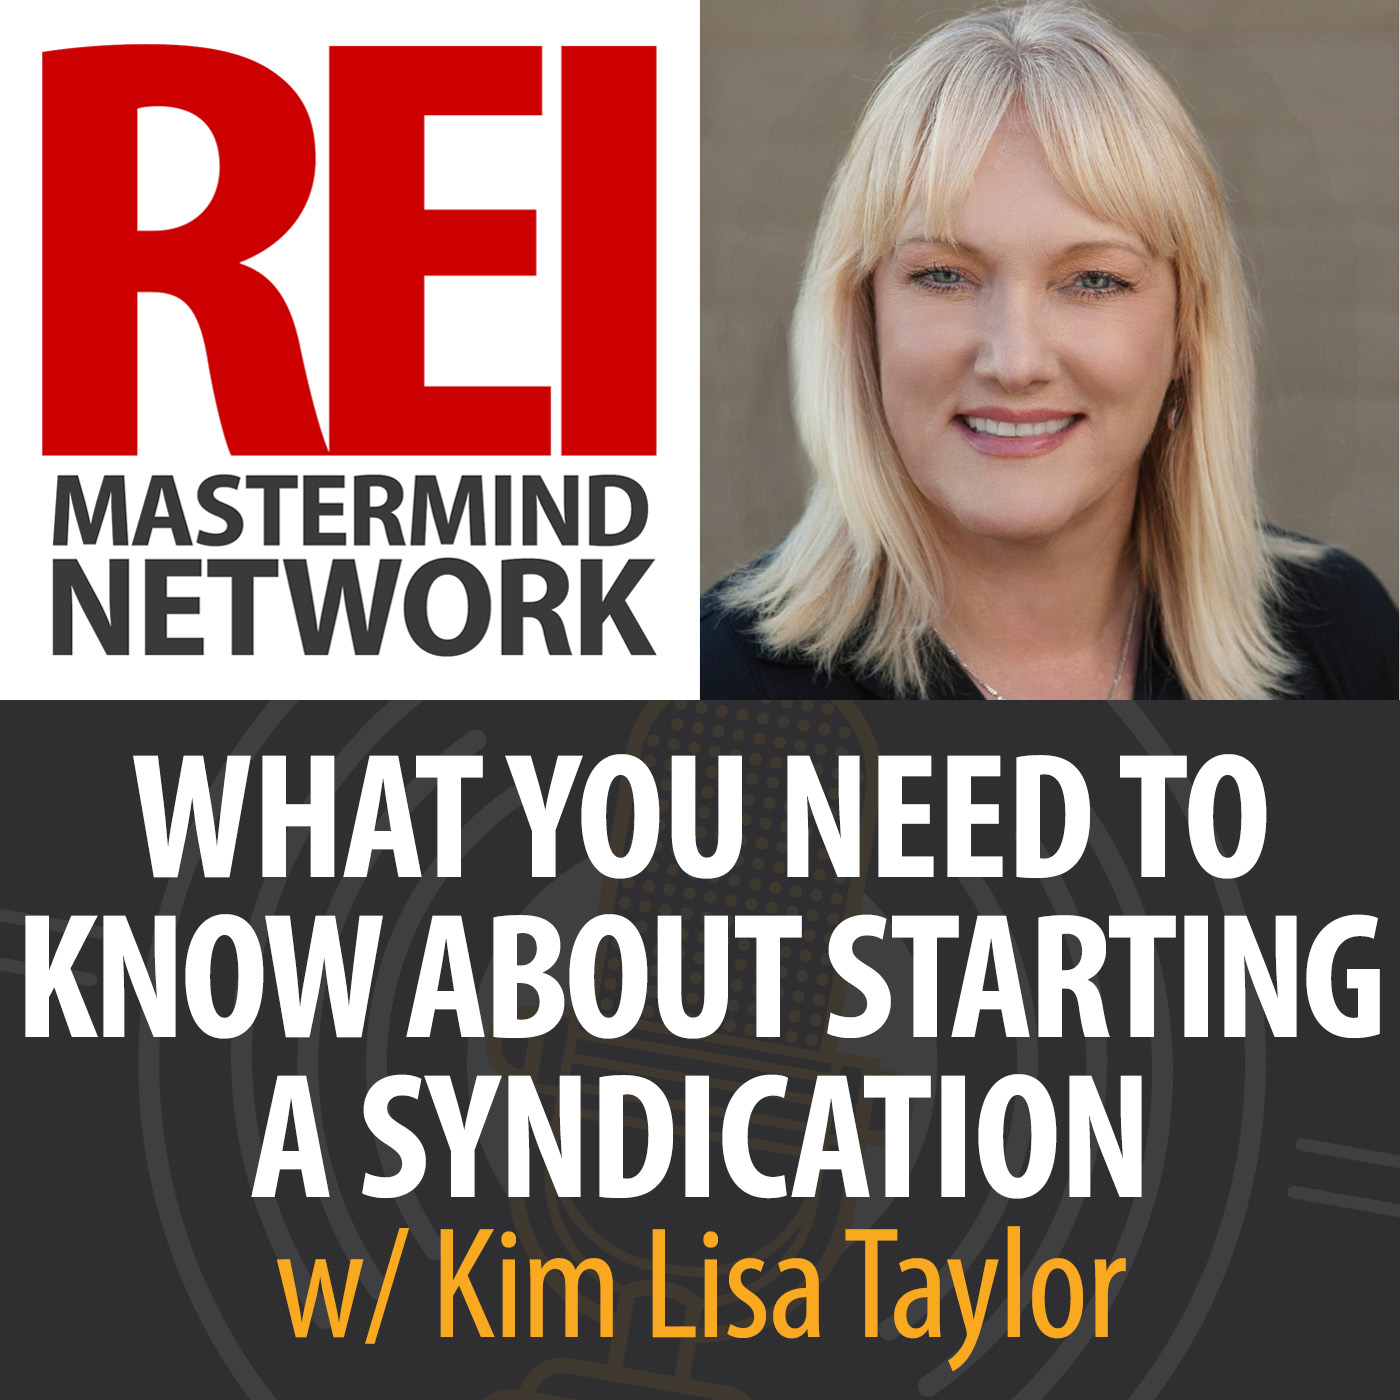 What You Need To Know About Starting A Syndication with Kim Lisa Taylor Image